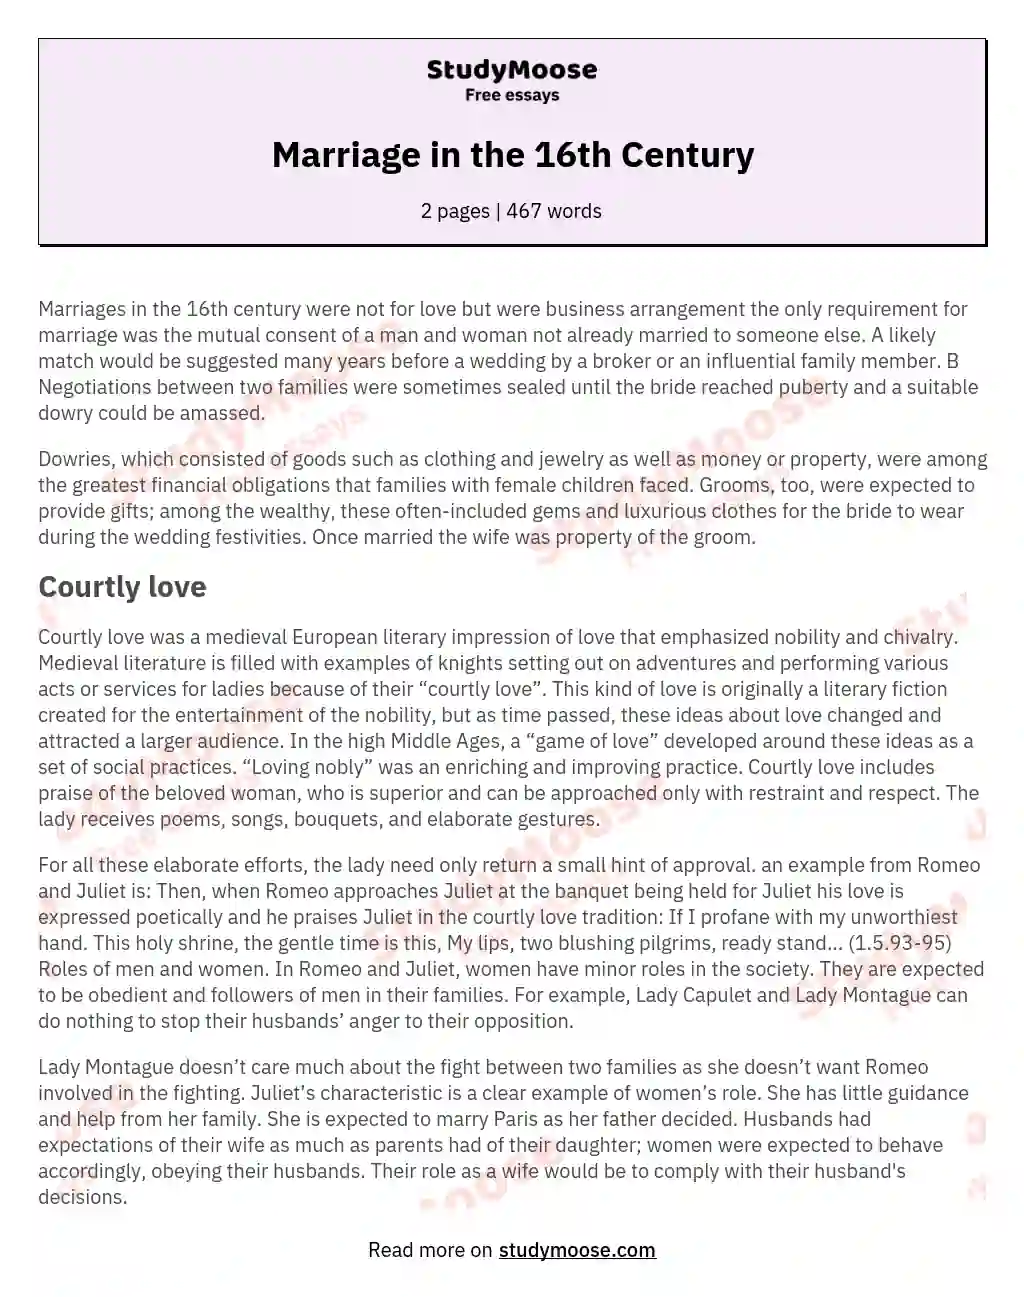 Marriage in the 16th Century essay